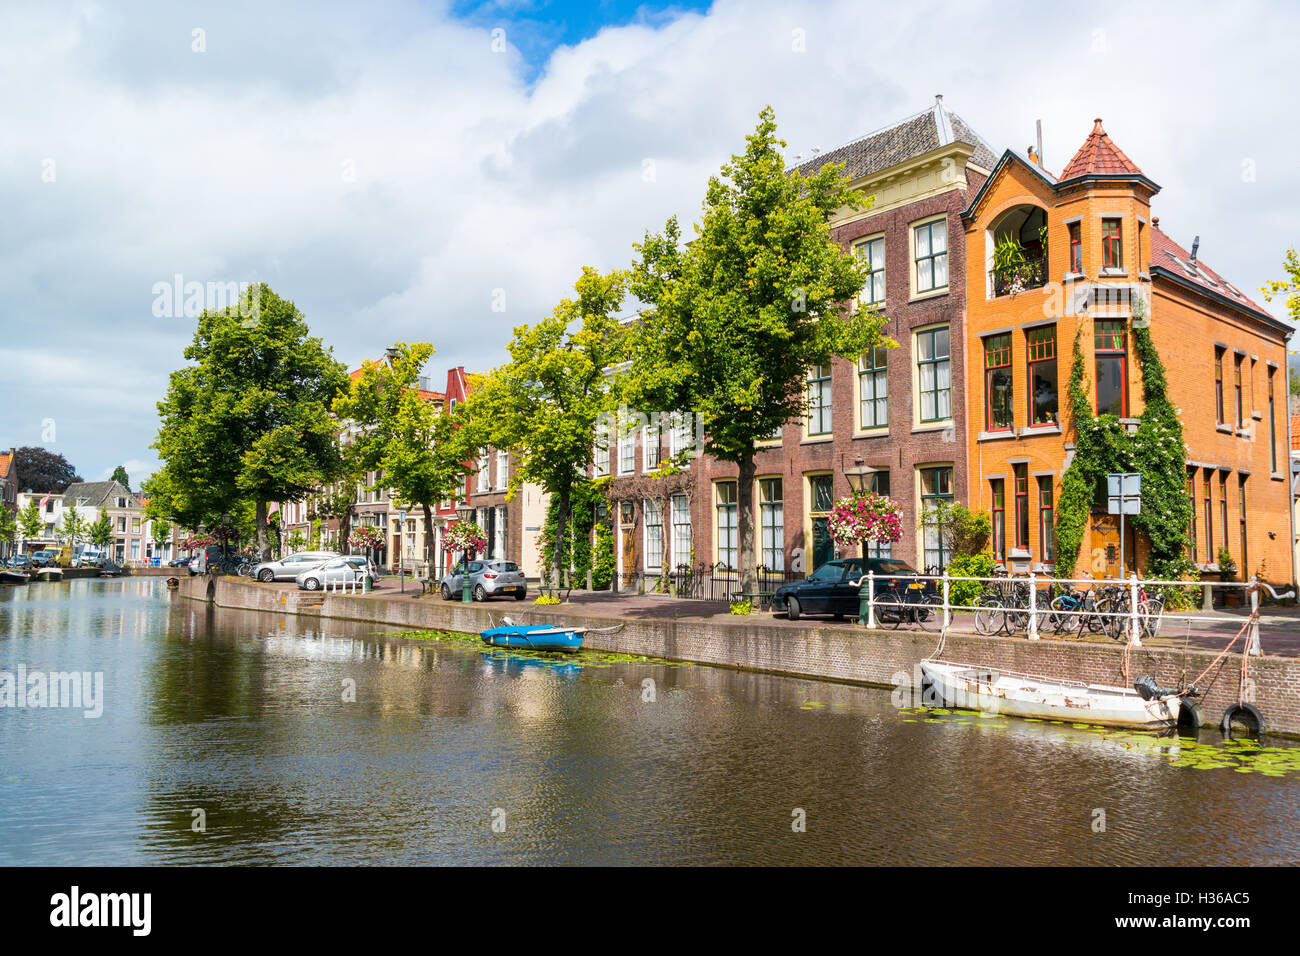 Rapenburg canal in old town of Leiden, South Holland, Netherlands Stock Photo